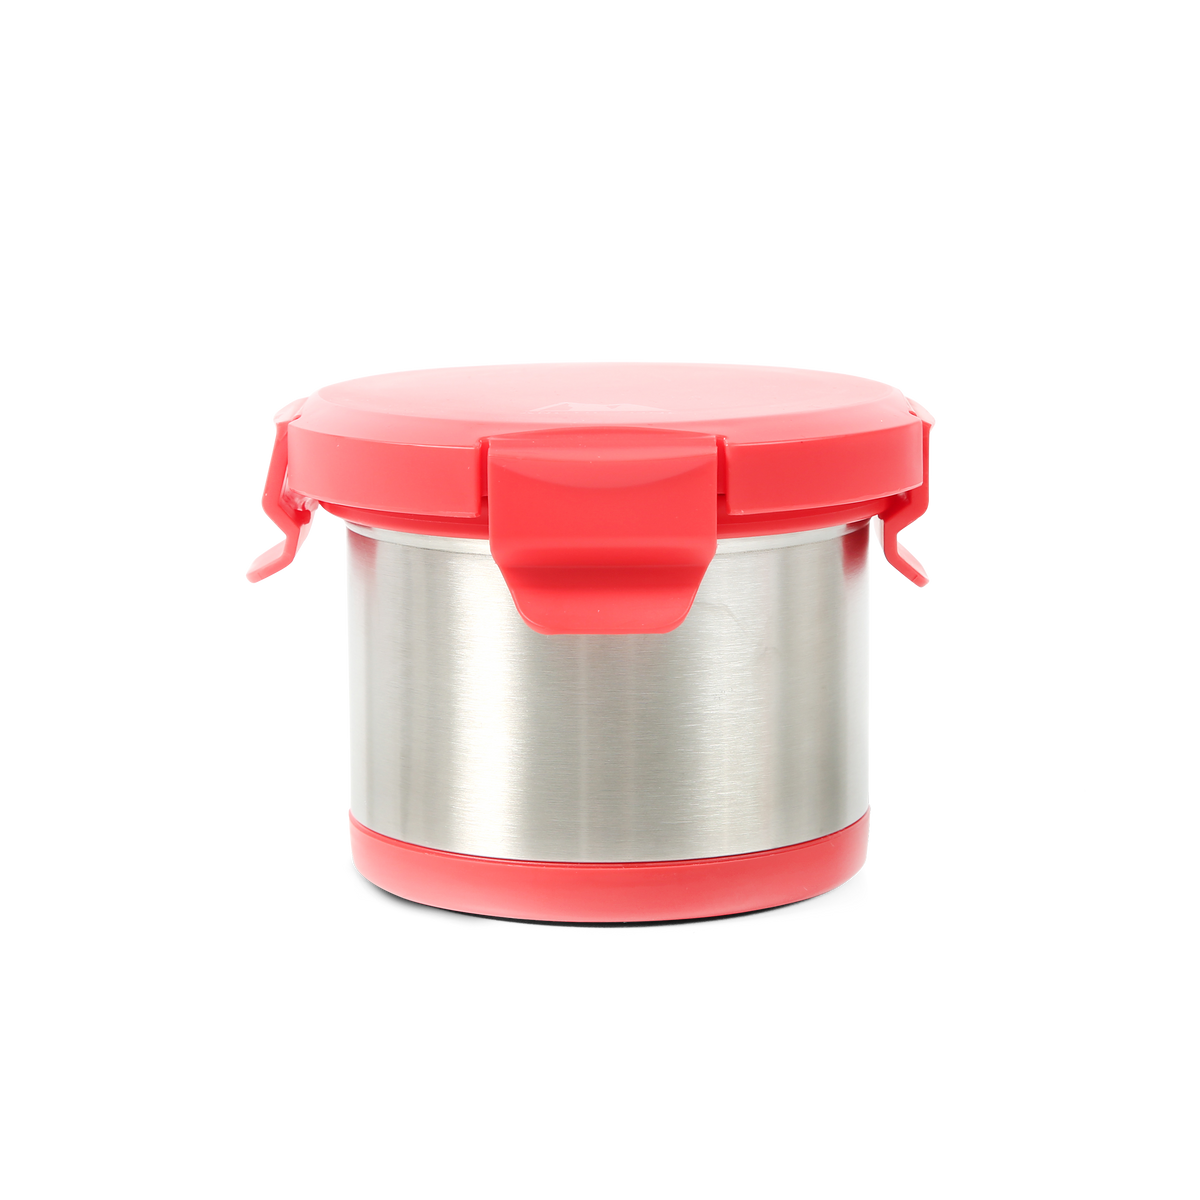 Stainless Steel Snack Containers,Easy Open Leak Proof Small Food